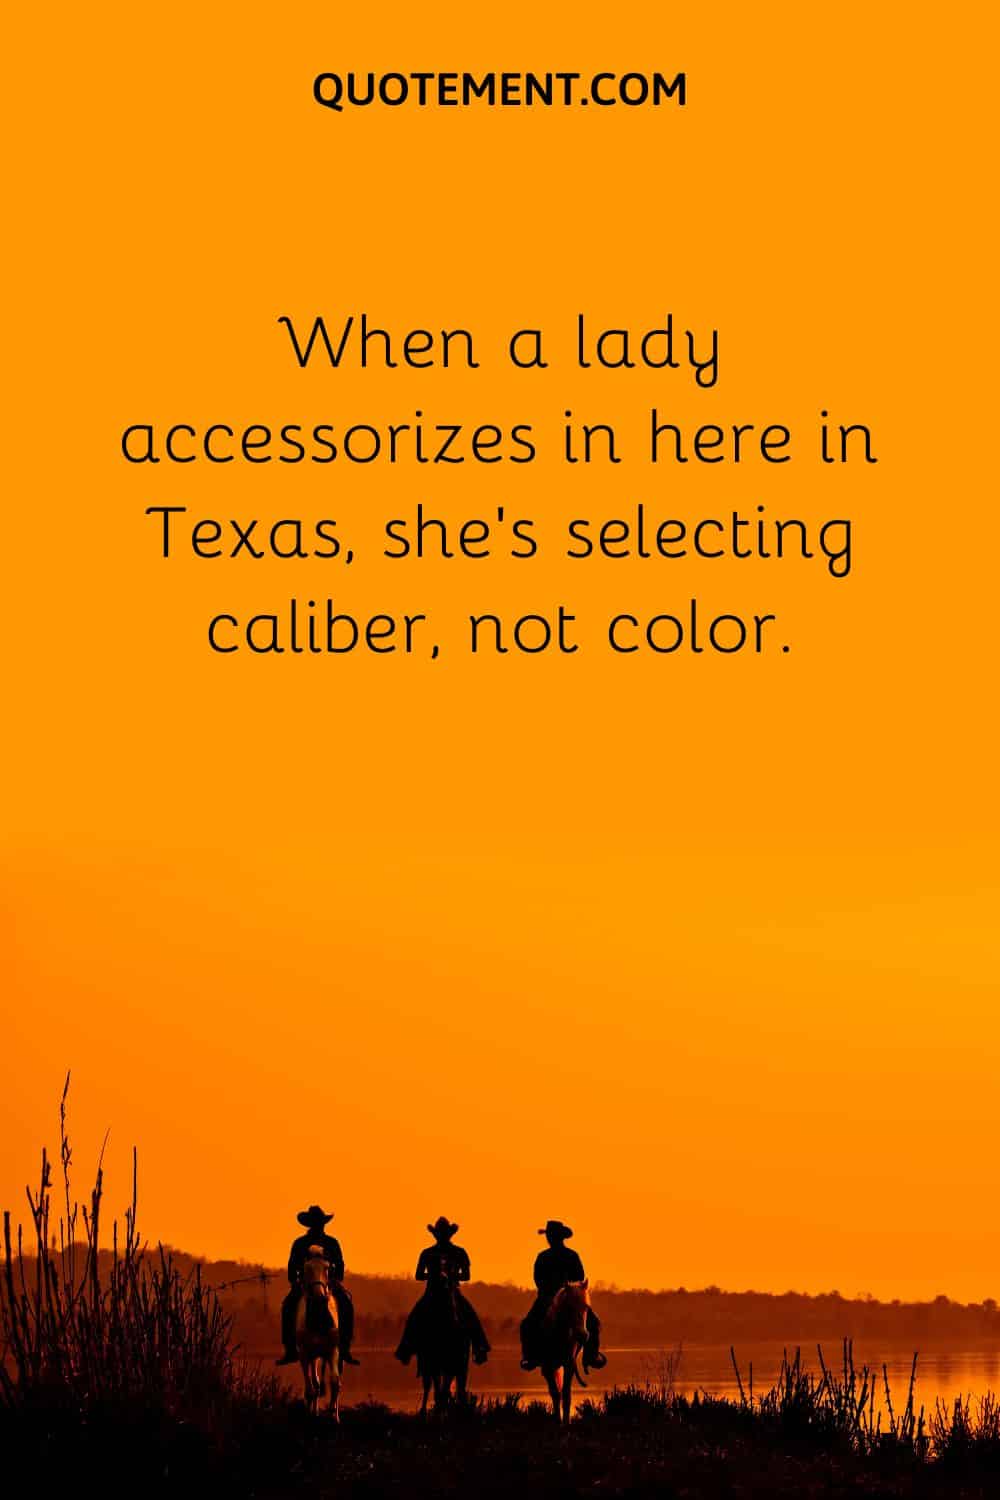 When a lady accessorizes in here in Texas, she’s selecting caliber, not color.